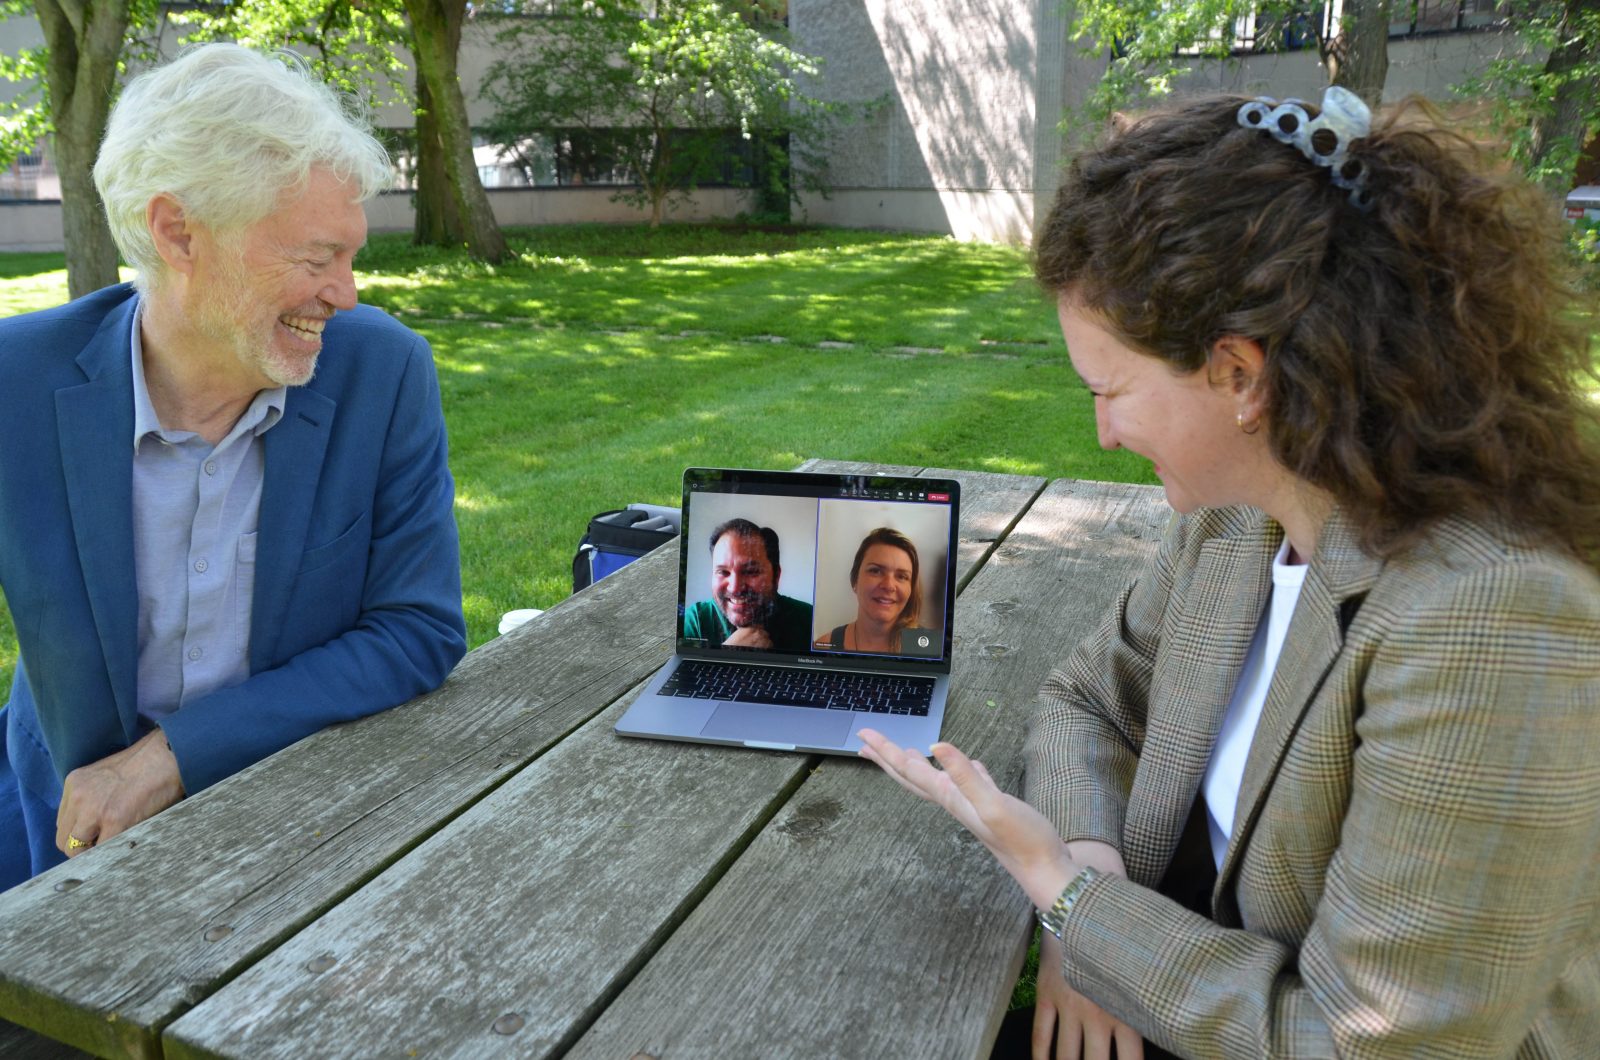 A laughing man with white hair wearing a medium blue jacket and a light blue shirt sitting at a picnic table leans in to look at a laptop screen with a man and a woman’s faces on the screen while a smiling woman with long brown hair, a brown checkered blazer and a white top and gesturing with her hand is also leaning into the laptop, with green space and a building in the background.